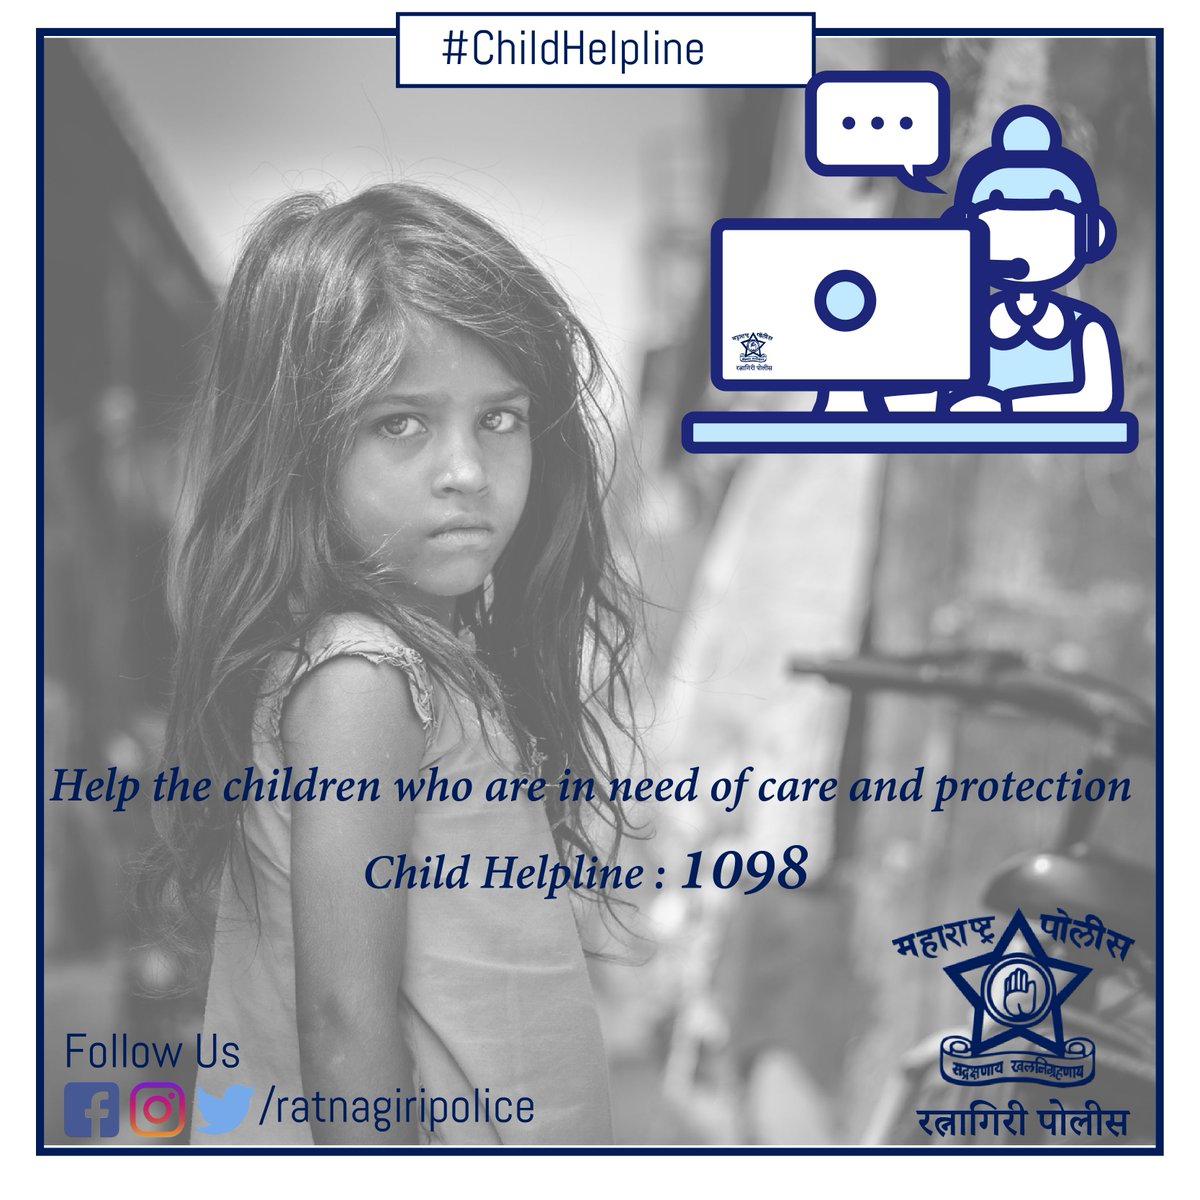 Help the children who are in need of care and protection, #ChildHelpLine 

#1098 for kids aged 0 to 18 #StaySafe #Ratnagiri